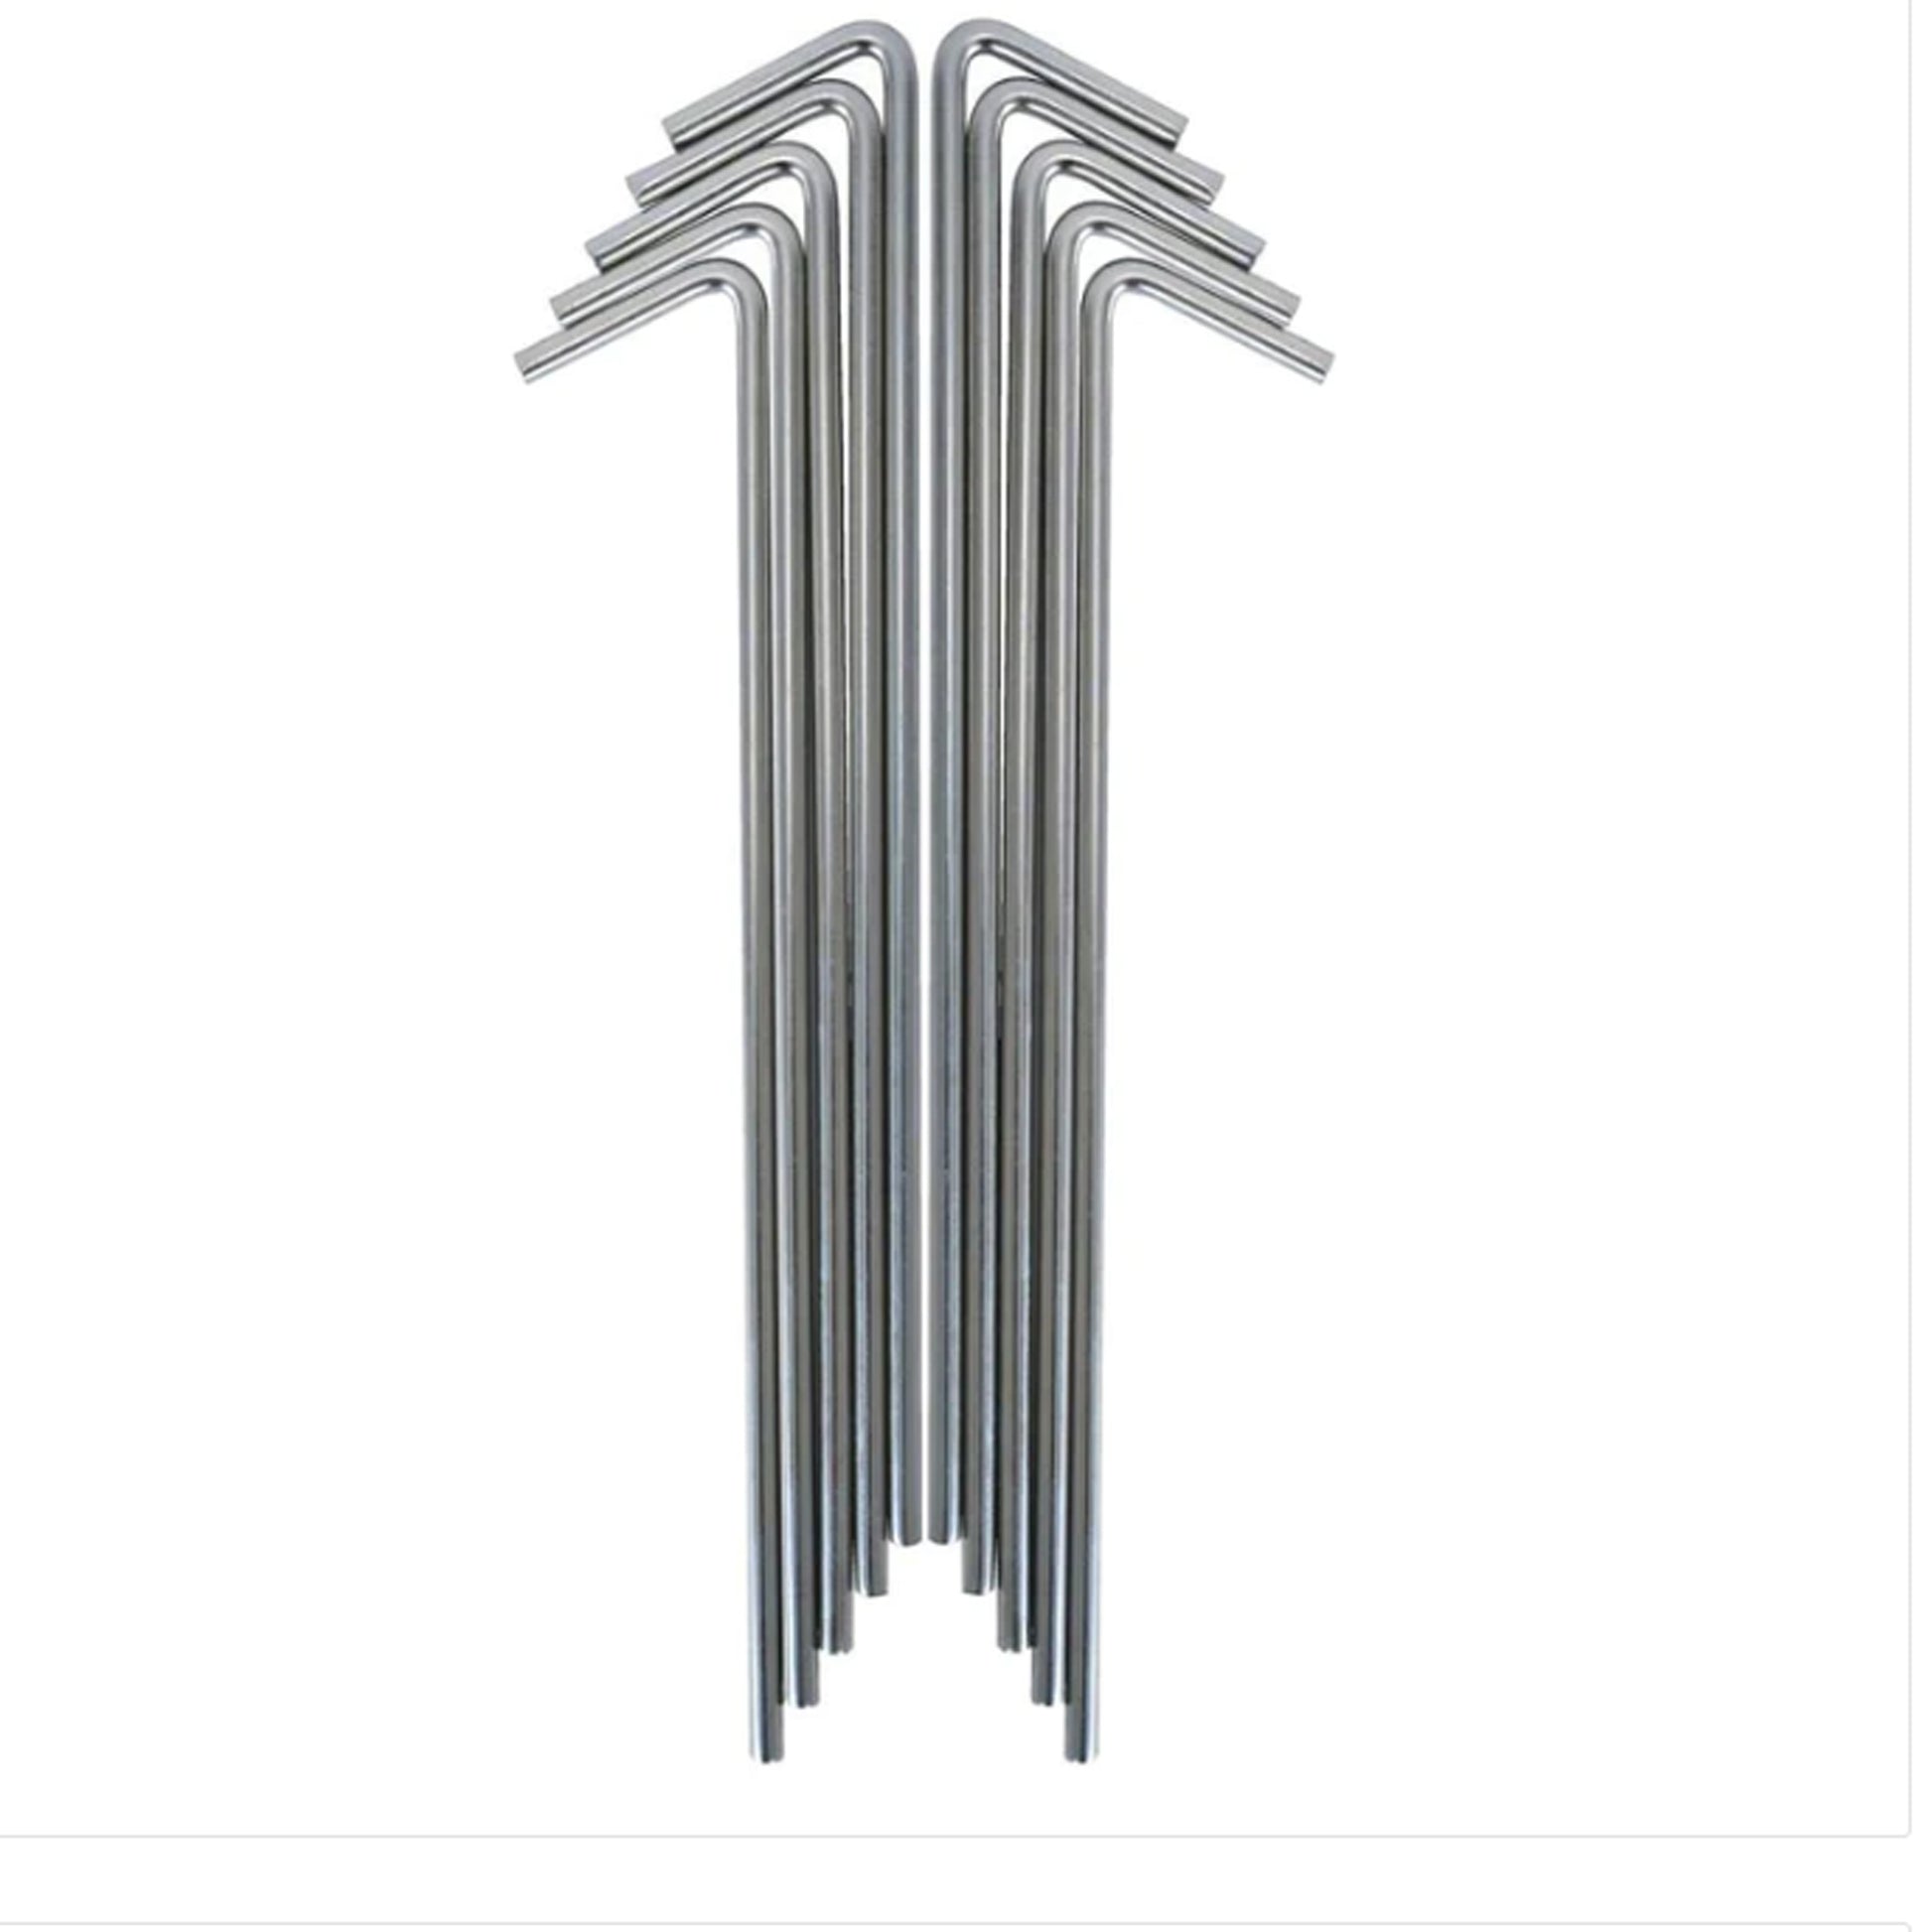 Large Galavanised Tent Peg 225mm (9in)  Great for supporting heavier tarps and tents  Price is for x1 tent peg www.defenceqstore.com.au